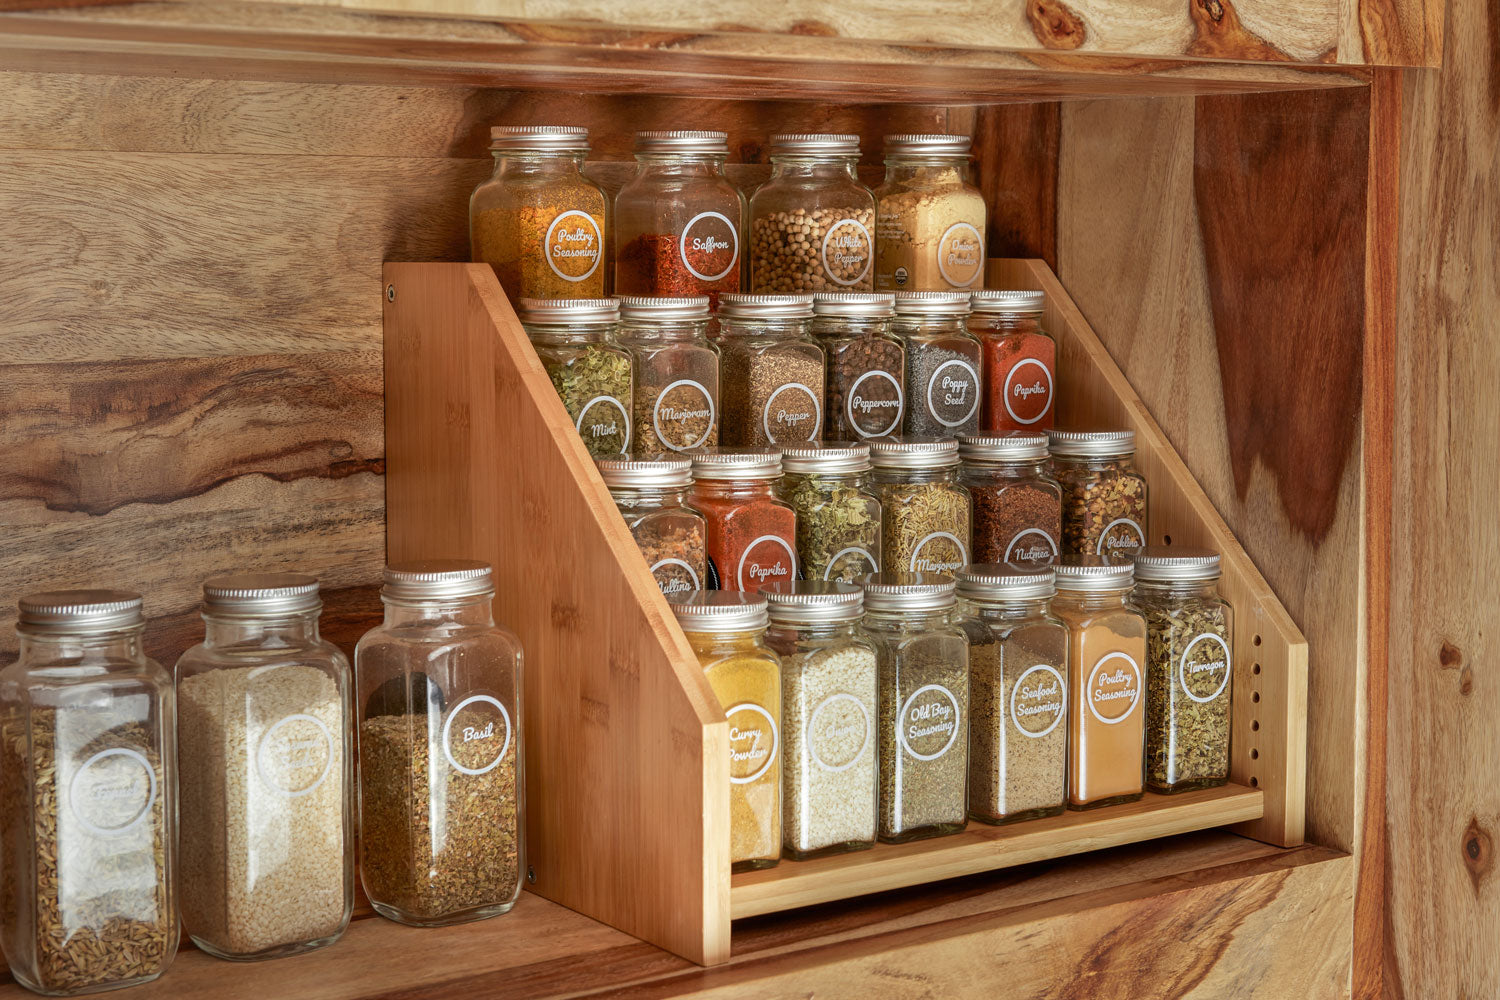 SpiceLuxe Bamboo Stadium Rack Beautiful Spice Organizer for Counter or  Cabinets | Spice Jars Not Included